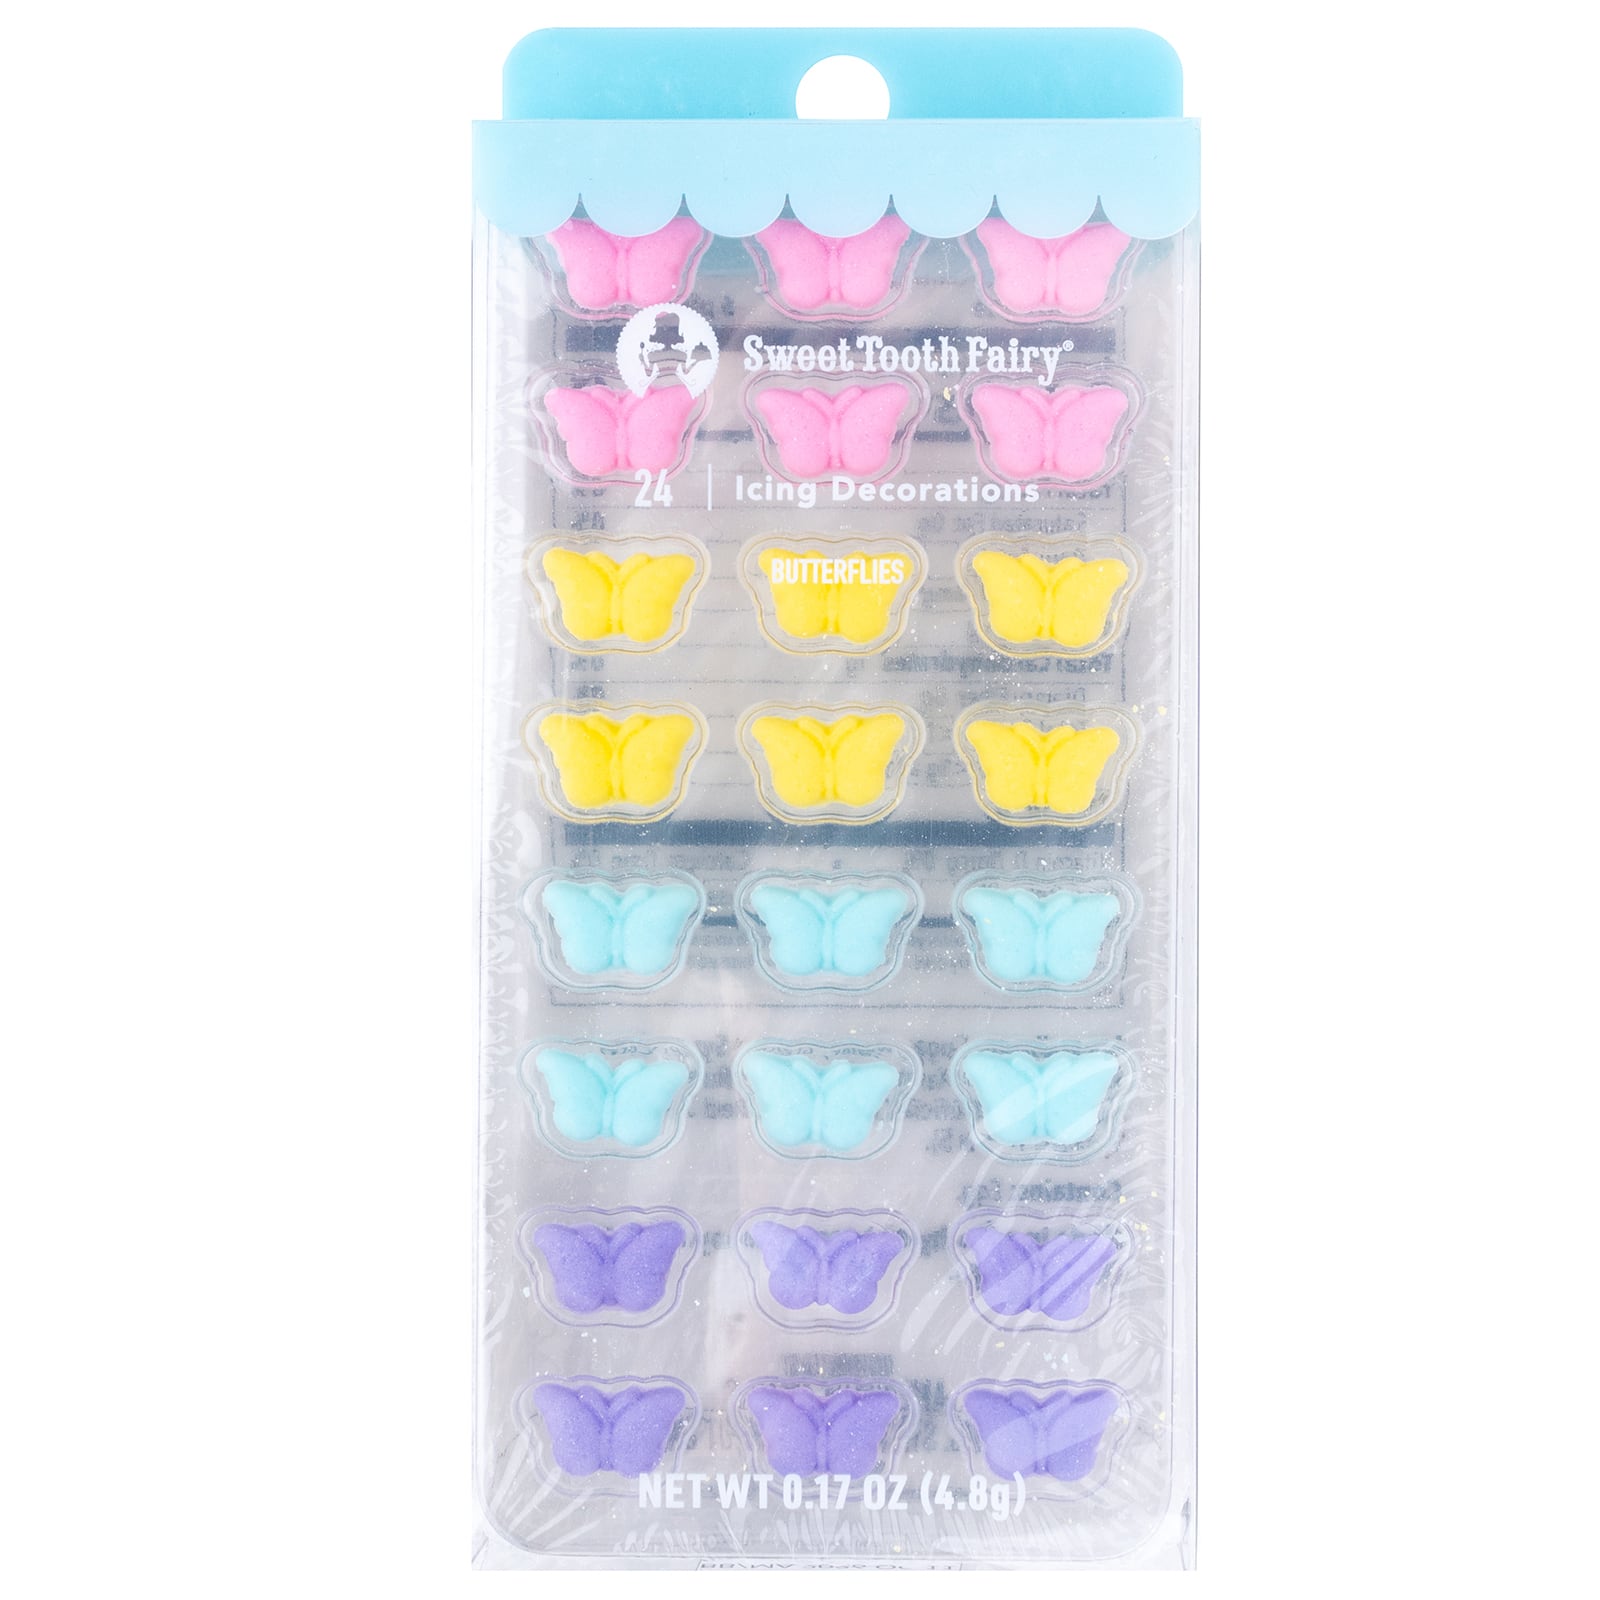 Sweet Tooth Fairy&#xAE; Butterflies Icing Decorations, 24ct.